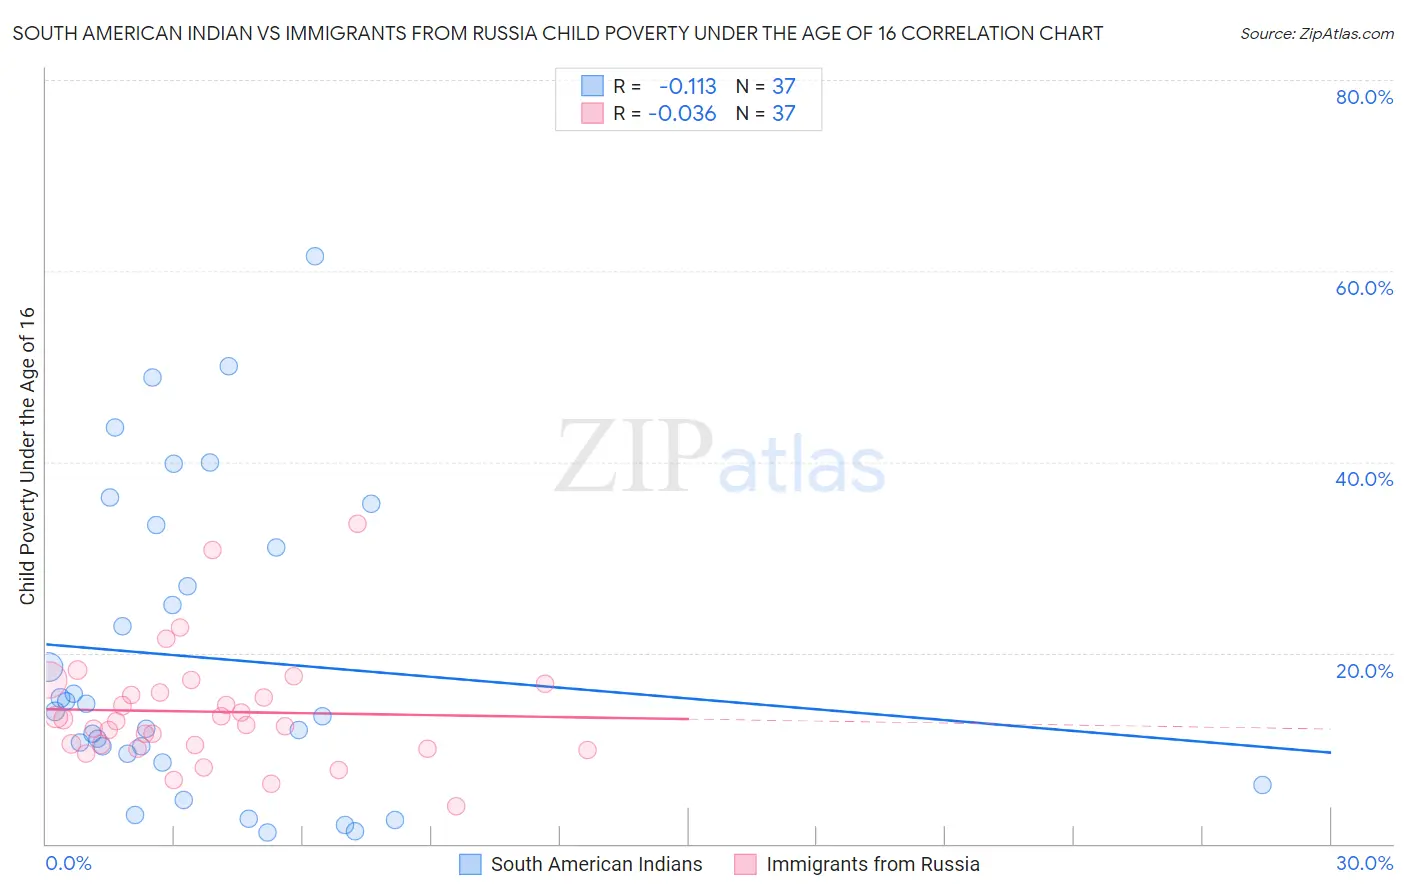 South American Indian vs Immigrants from Russia Child Poverty Under the Age of 16